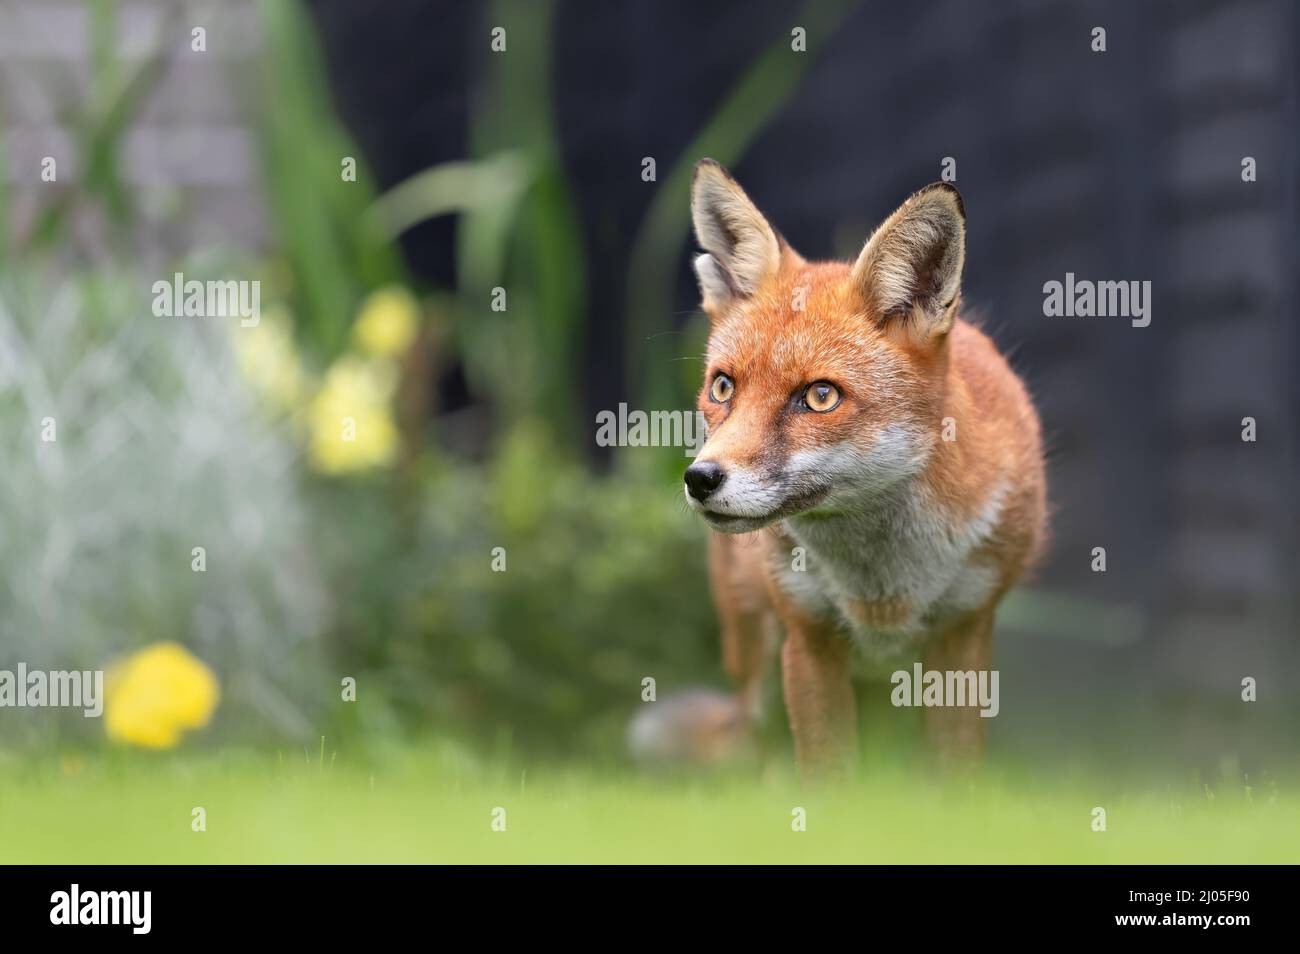 Close up of a red fox (Vulpes vulpes) in a garden in summer, United Kingdom. Stock Photo